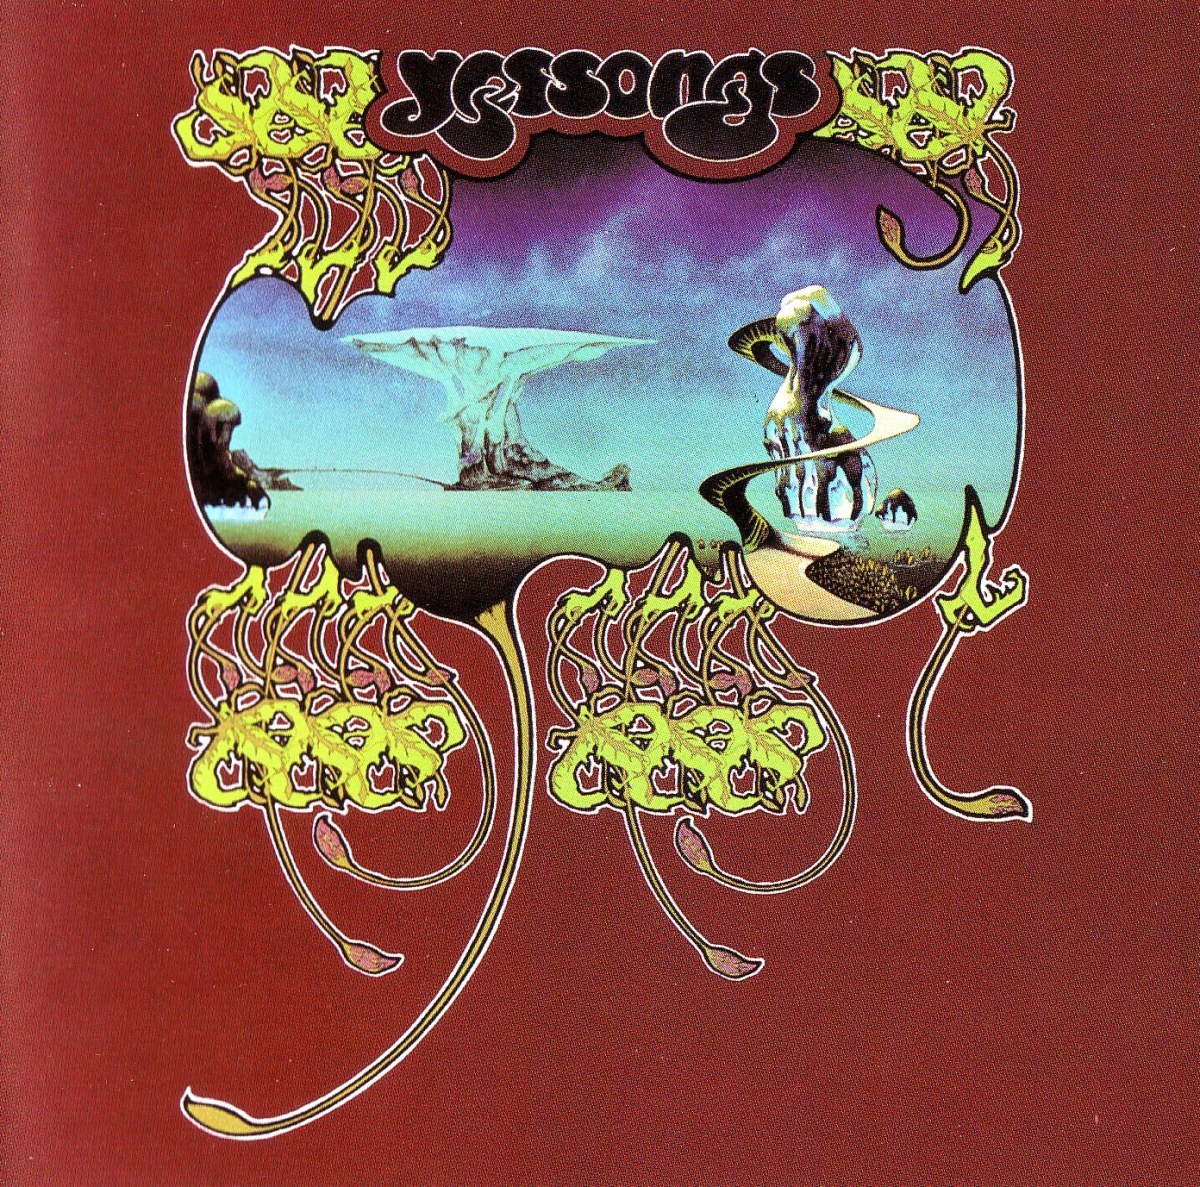 Yes "Yessongs" Atlantic Records SD 3-100  12" 3 LP Vinyl Record Set, US Pressing (1973) Tri-Fold Album Cover Art & Design by Roger Dean